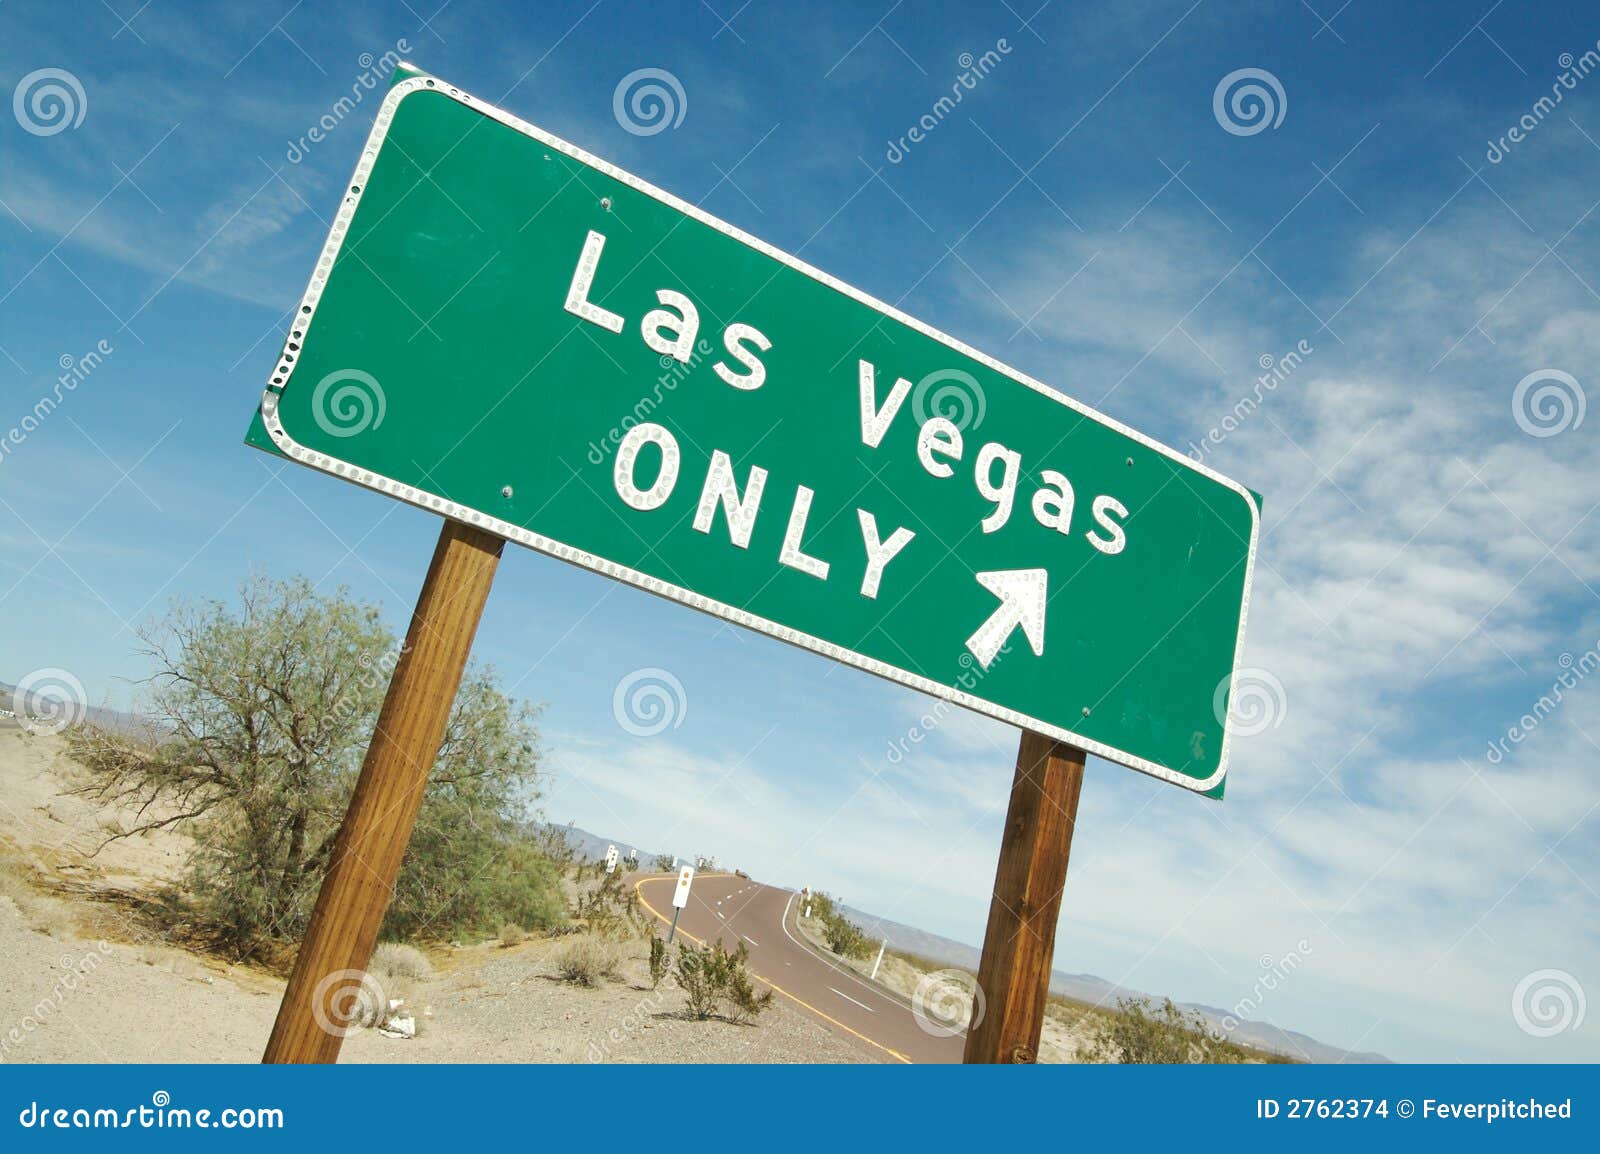 1,100+ Vegas Road Sign Stock Photos, Pictures & Royalty-Free Images -  iStock